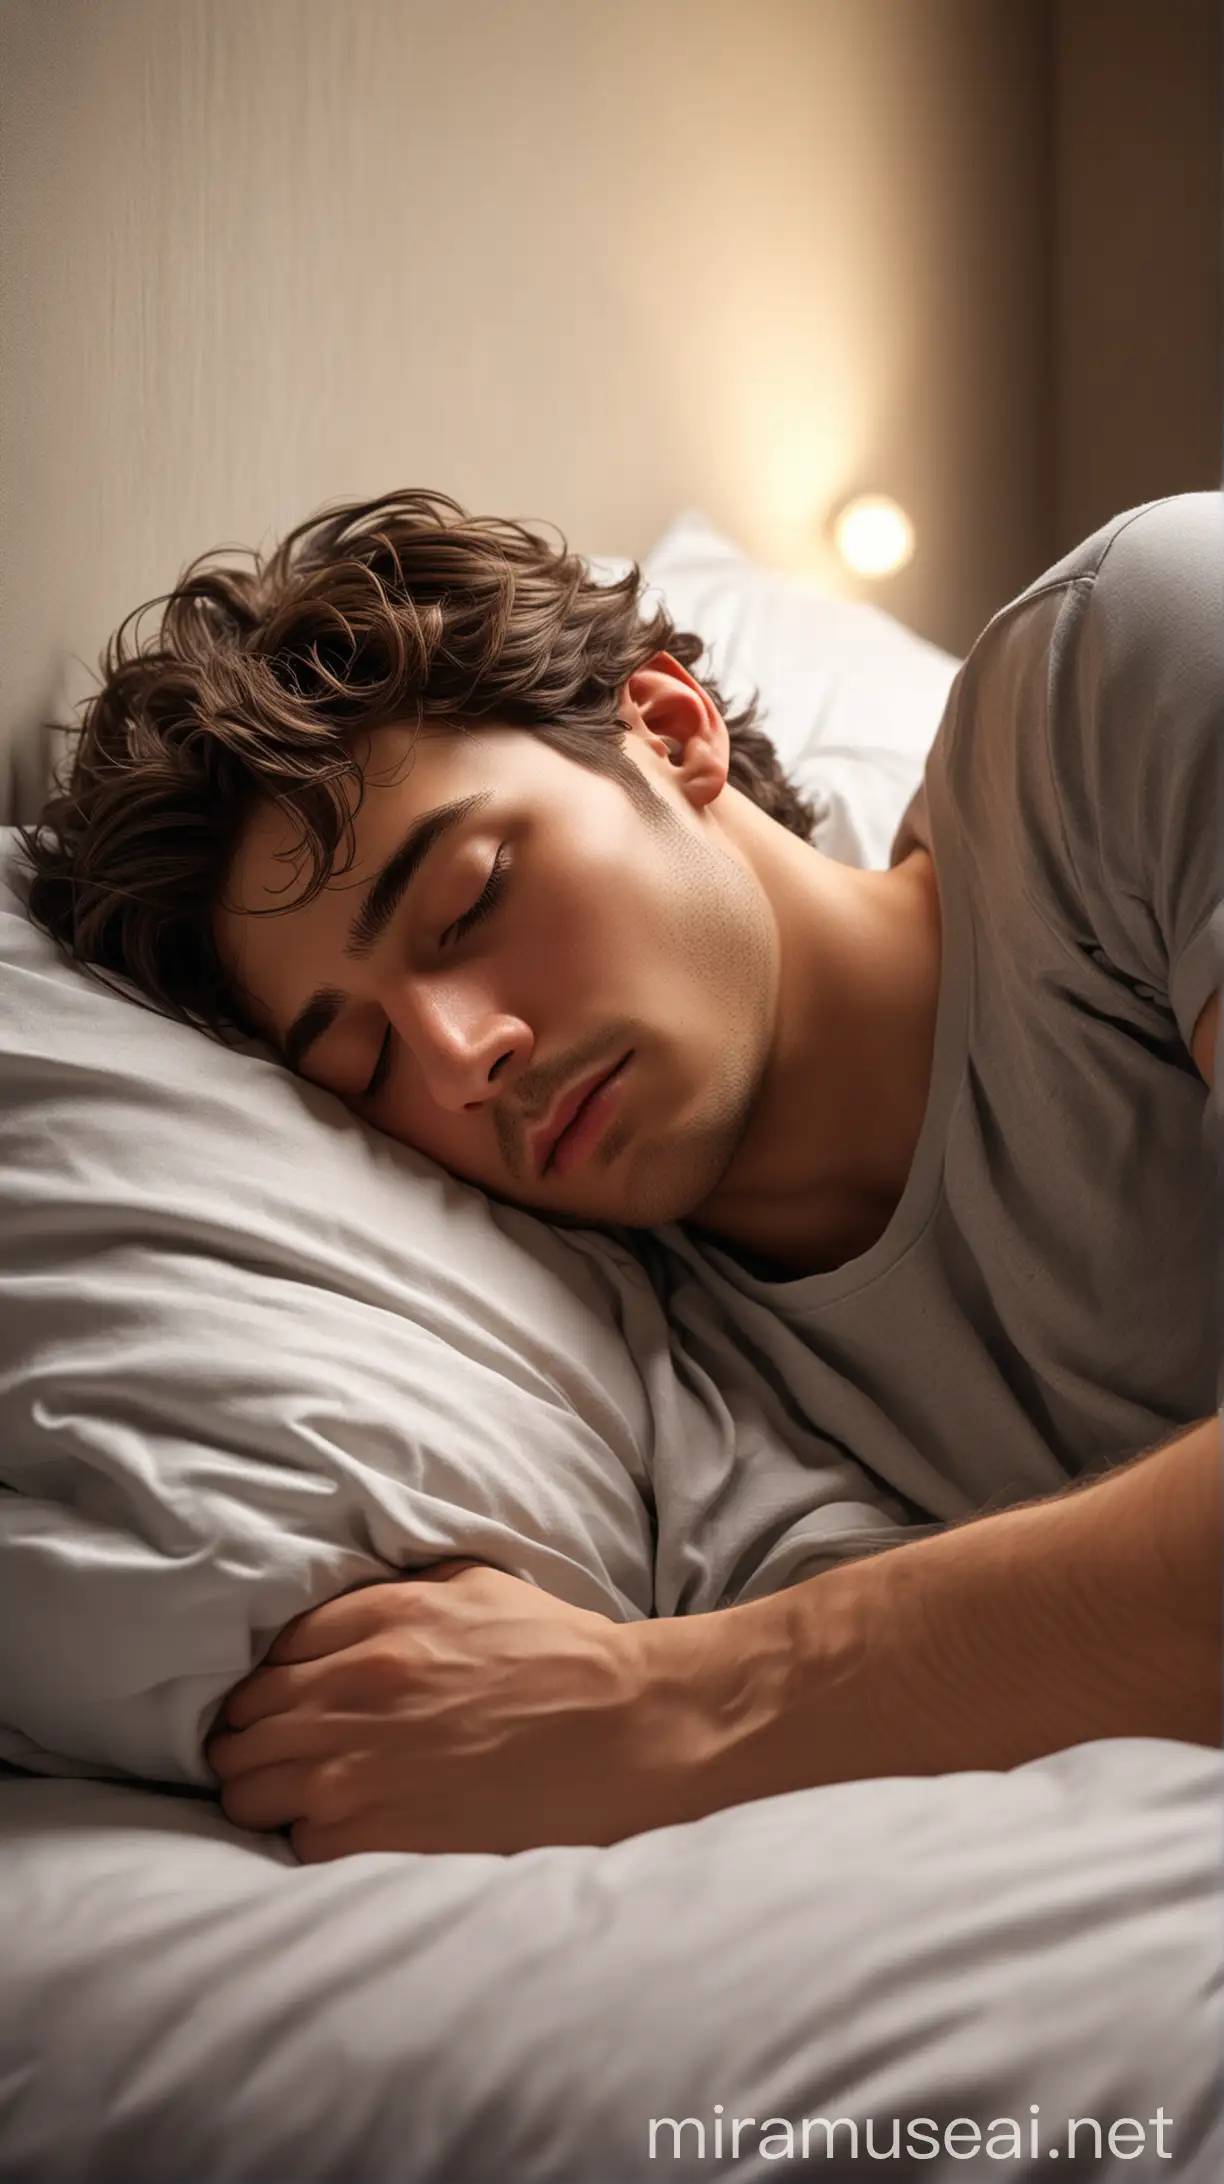 Create a 3d ultra high resolution image of a young male figure sleeping in a bed with dynamic lighting, dynamic colors.